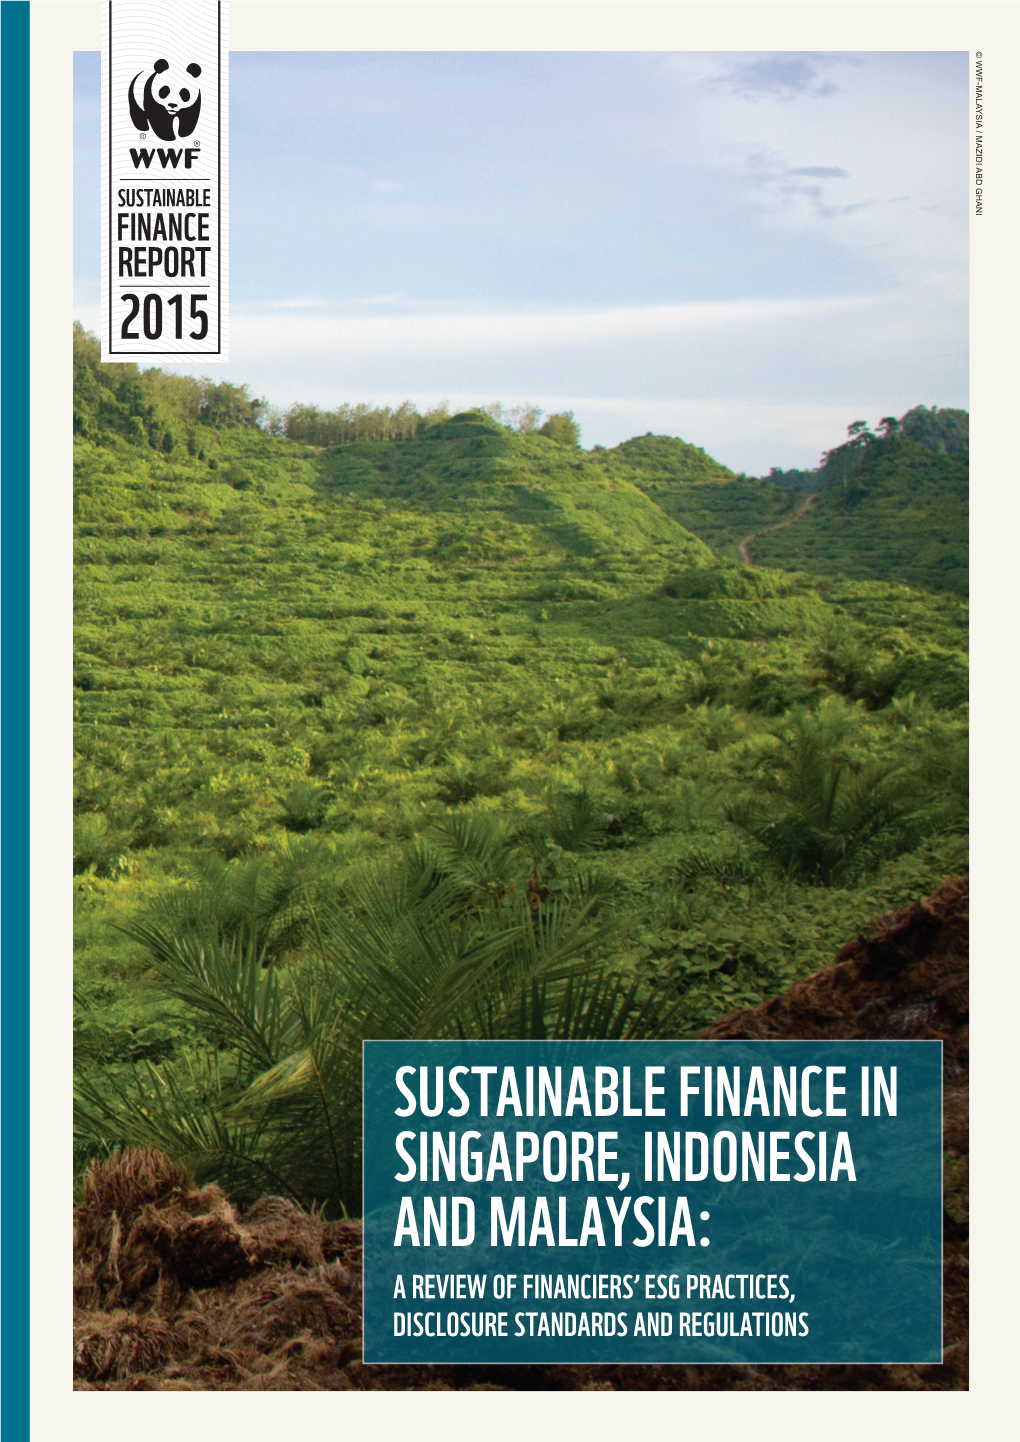 Sustainable Finance in Singapore, Indonesia and Malaysia: a Review of Financiers’ Esg Practices, Disclosure Standards and Regulations